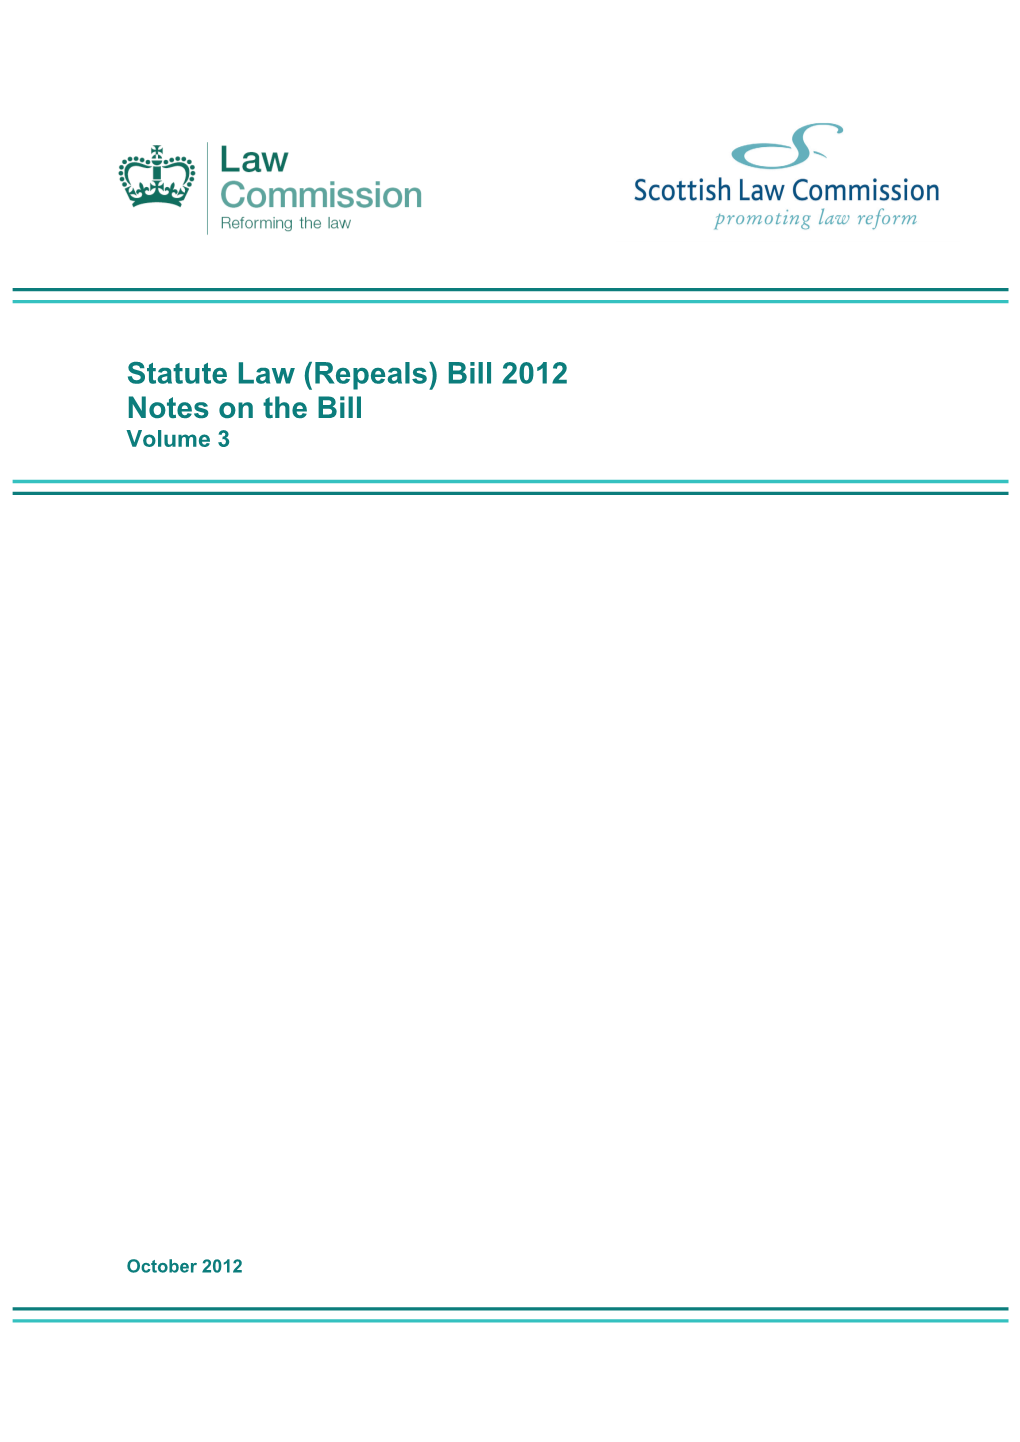 Statute Law (Repeals) Bill 2012 Notes on the Bill Volume 3